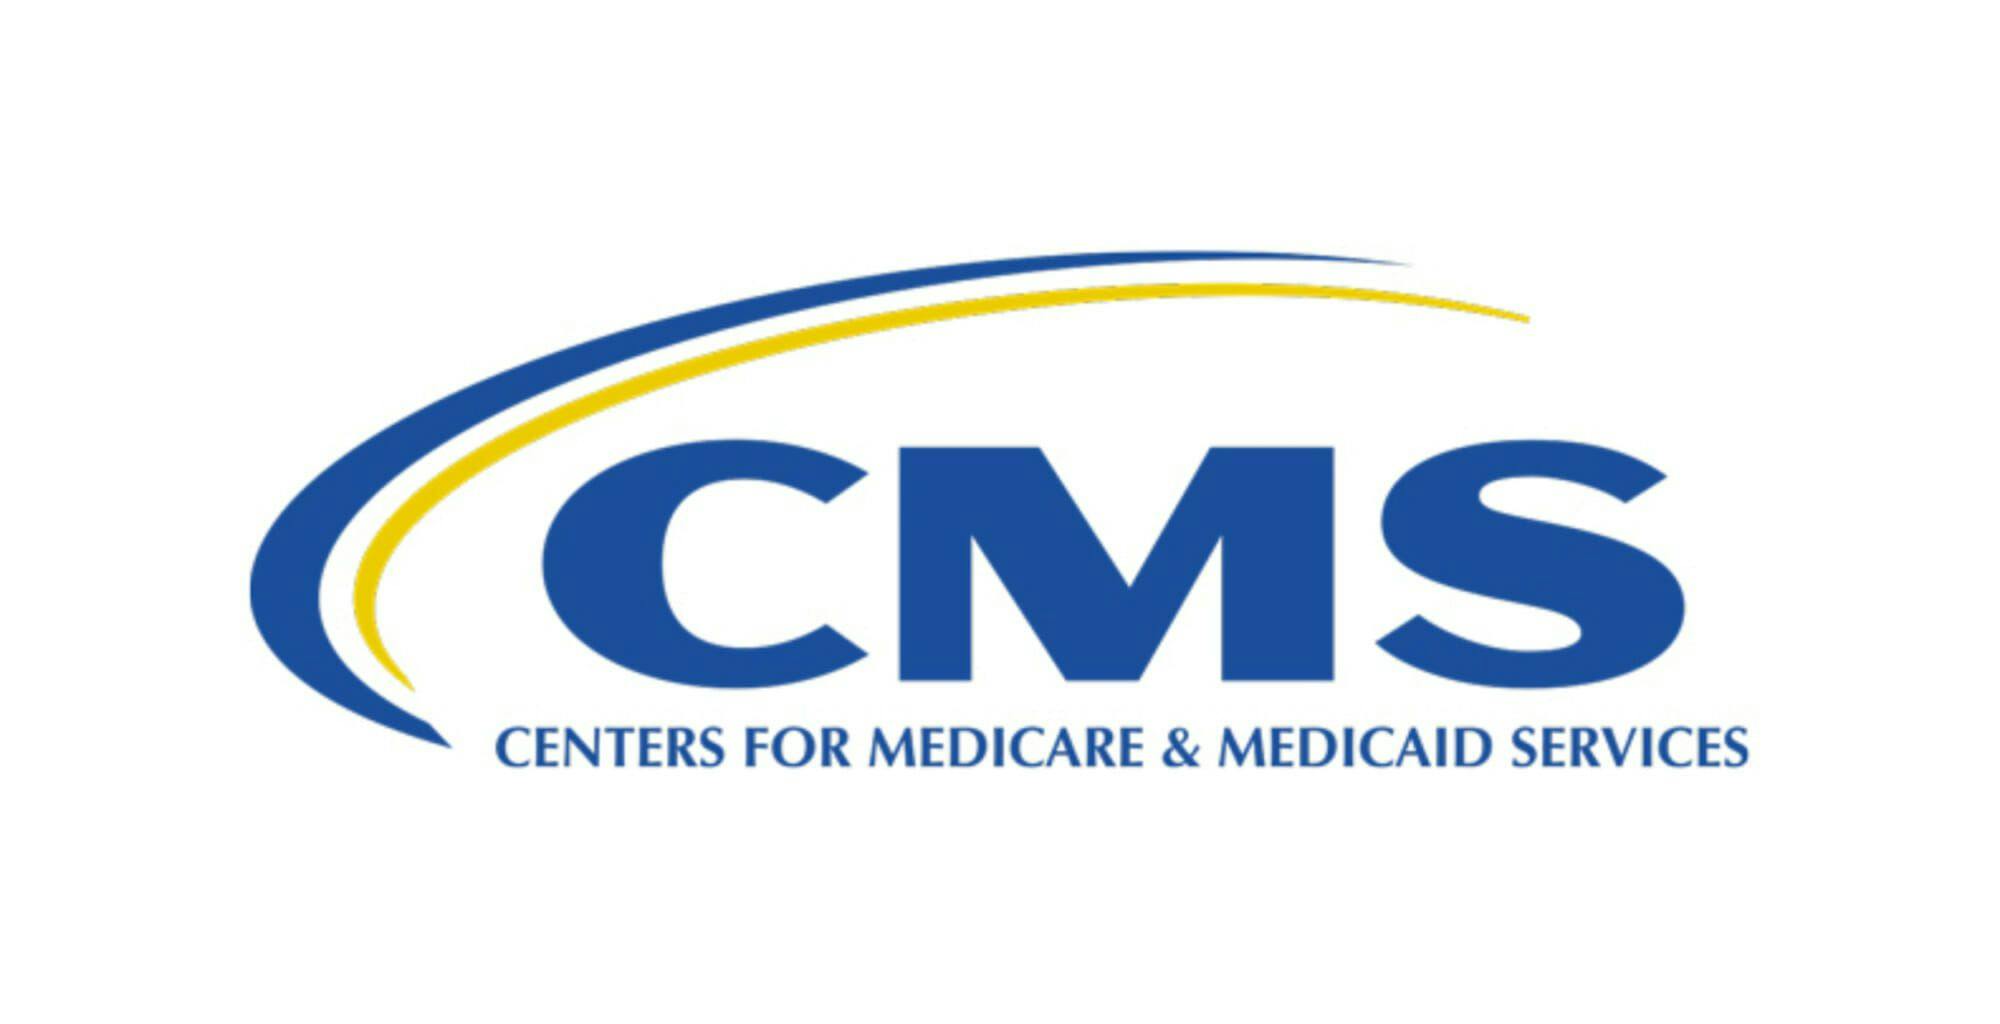 CMS Announces OCM Successor, but Gap Year Remains for Oncology Practices